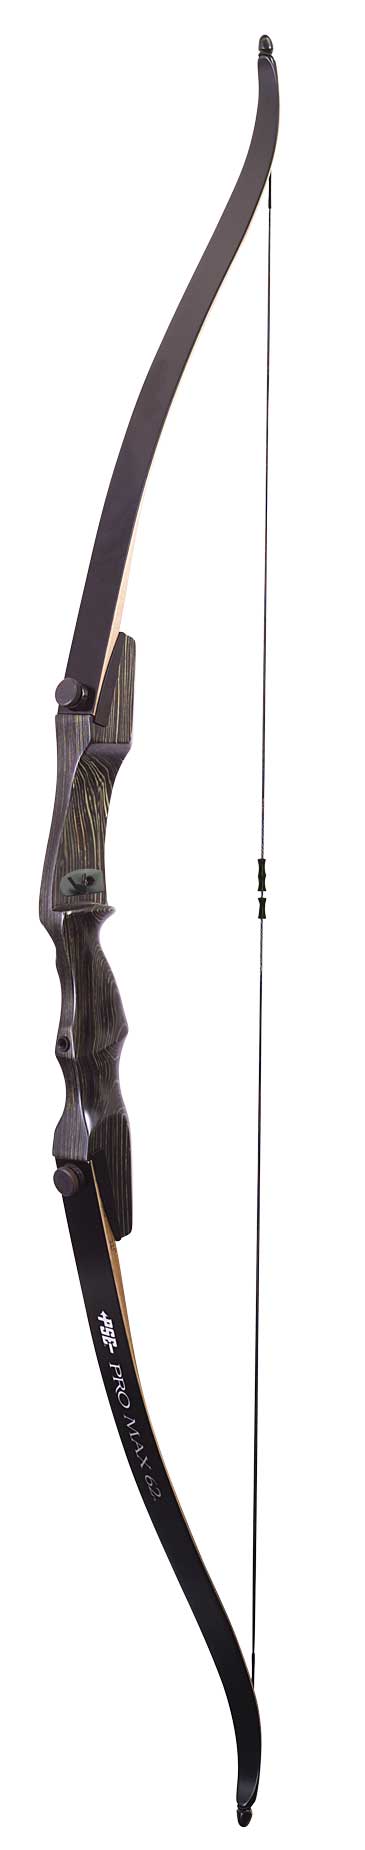 PSE Archery Pro Max Recurve Bow Set  Up to 29% Off w/ Free Shipping and  Handling